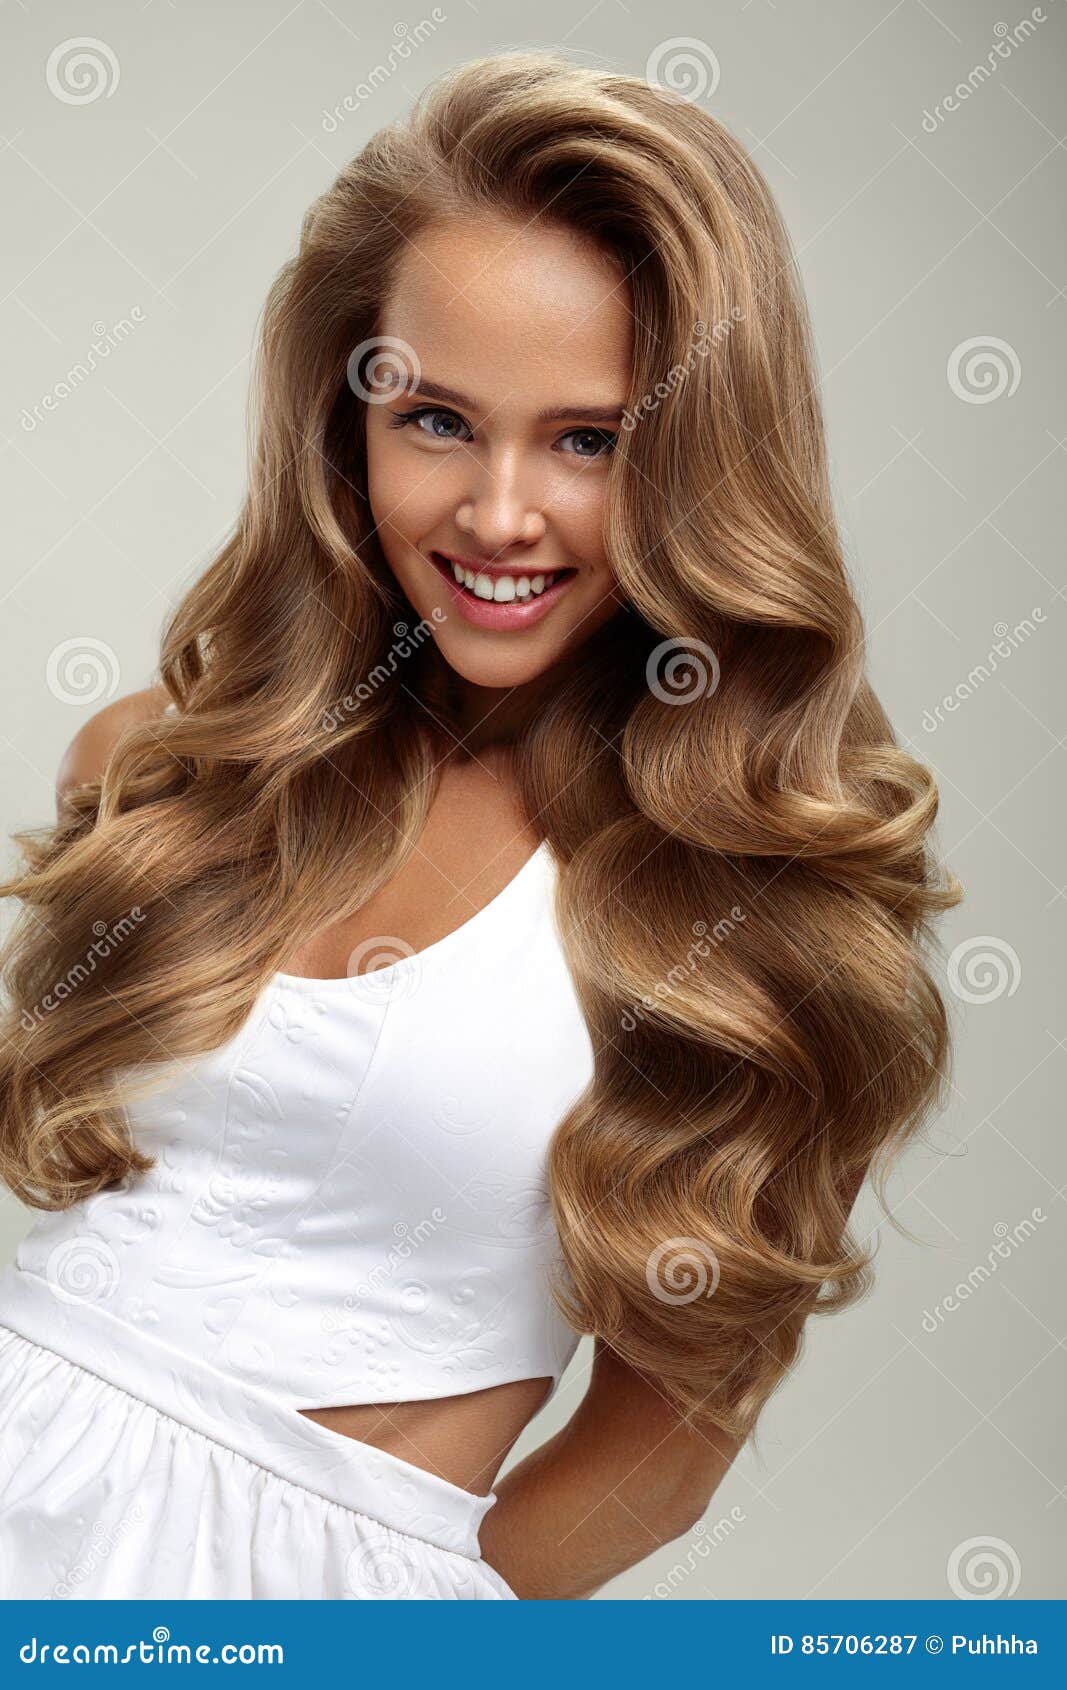 Perfect Hair  Beautiful Woman Model  With Long  Blonde Curly  